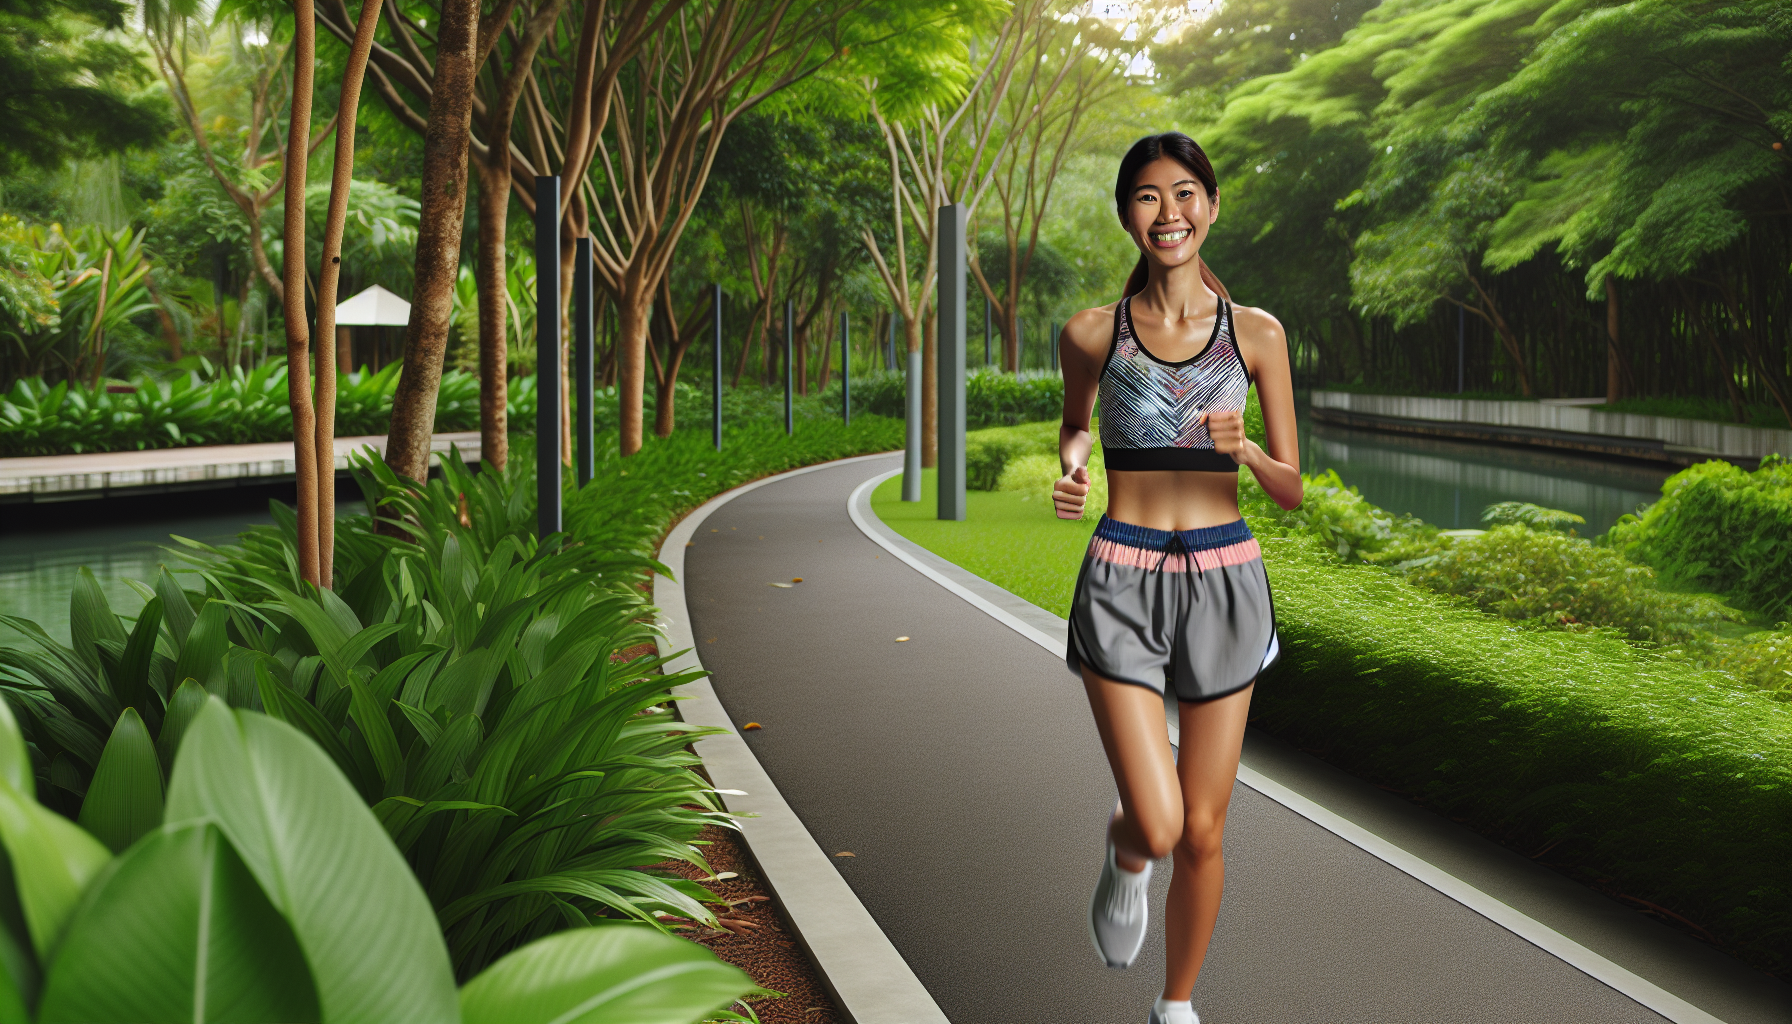 An Asian woman wearing sporty attire smiles while jogging on a lush green path.